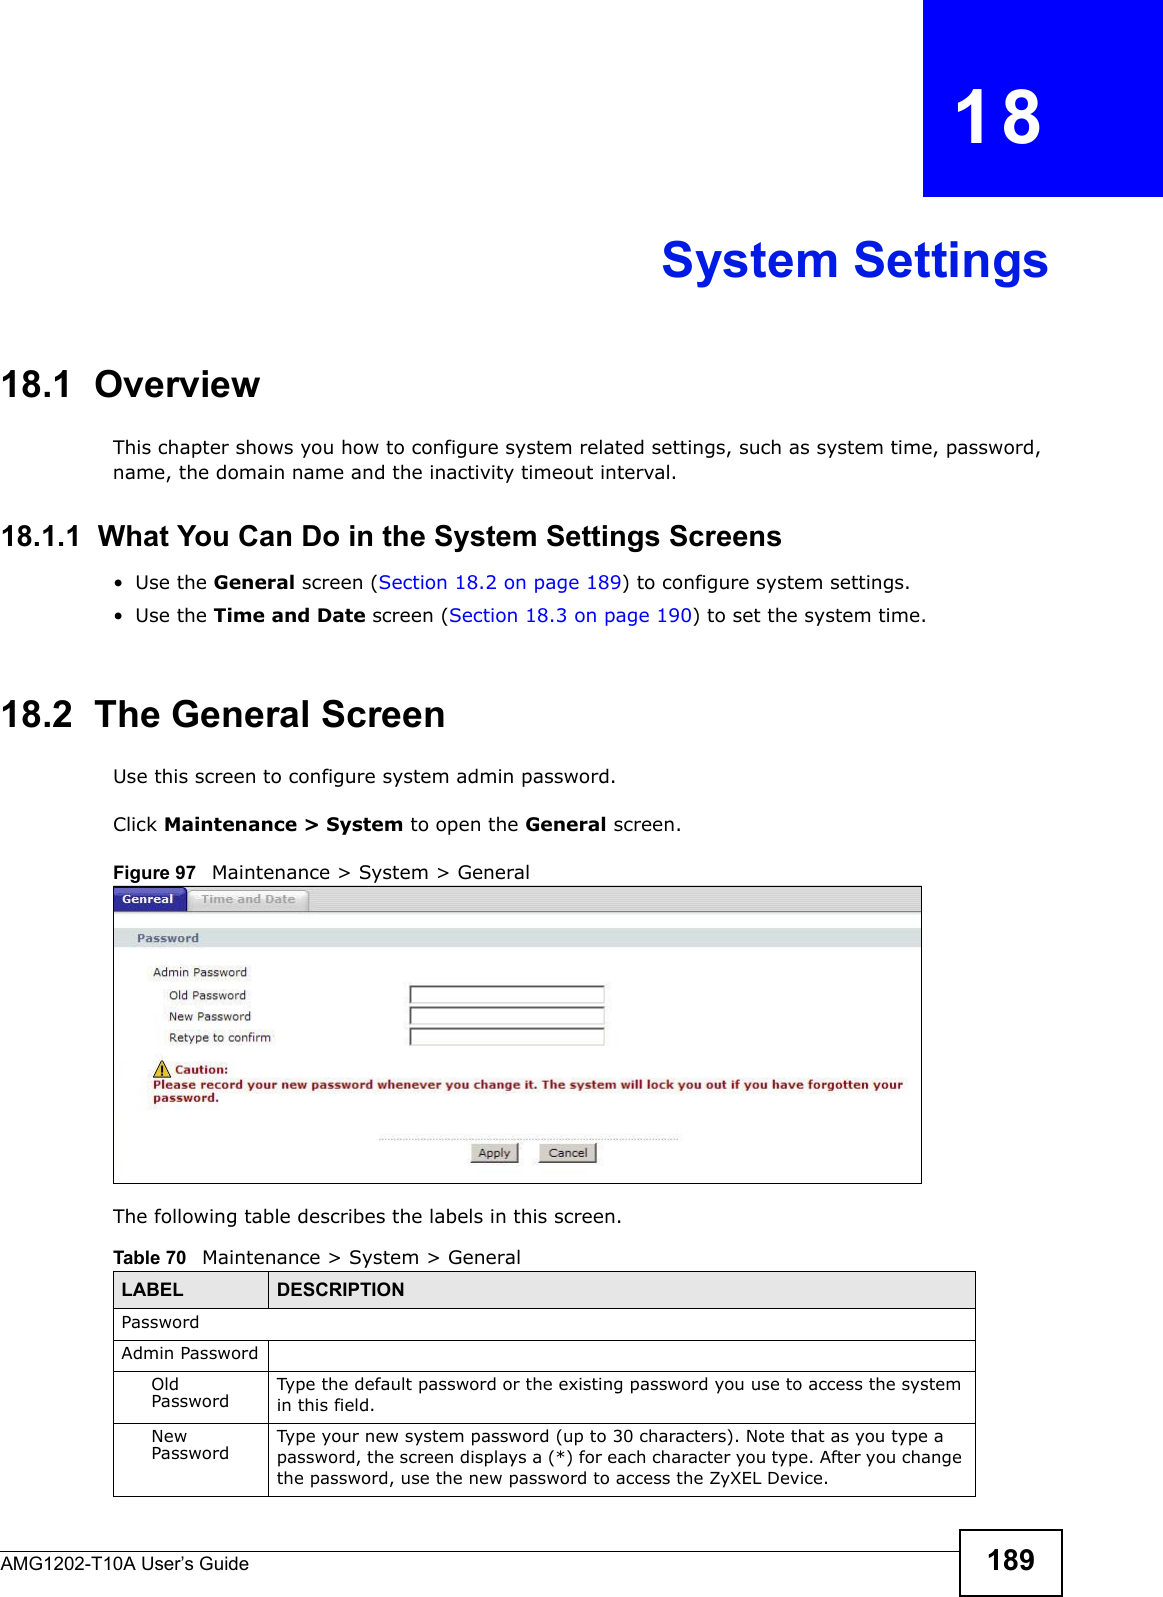 AMG1202-T10A User’s Guide 189CHAPTER   18System Settings18.1  OverviewThis chapter shows you how to configure system related settings, such as system time, password, name, the domain name and the inactivity timeout interval.    18.1.1  What You Can Do in the System Settings Screens•Use the General screen (Section 18.2 on page 189) to configure system settings.•Use the Time and Date screen (Section 18.3 on page 190) to set the system time.18.2  The General ScreenUse this screen to configure system admin password.Click Maintenance &gt; System to open the General screen. Figure 97   Maintenance &gt; System &gt; GeneralThe following table describes the labels in this screen. Table 70   Maintenance &gt; System &gt; GeneralLABEL DESCRIPTIONPasswordAdmin PasswordOld Password Type the default password or the existing password you use to access the system in this field.New Password Type your new system password (up to 30 characters). Note that as you type a password, the screen displays a (*) for each character you type. After you change the password, use the new password to access the ZyXEL Device.